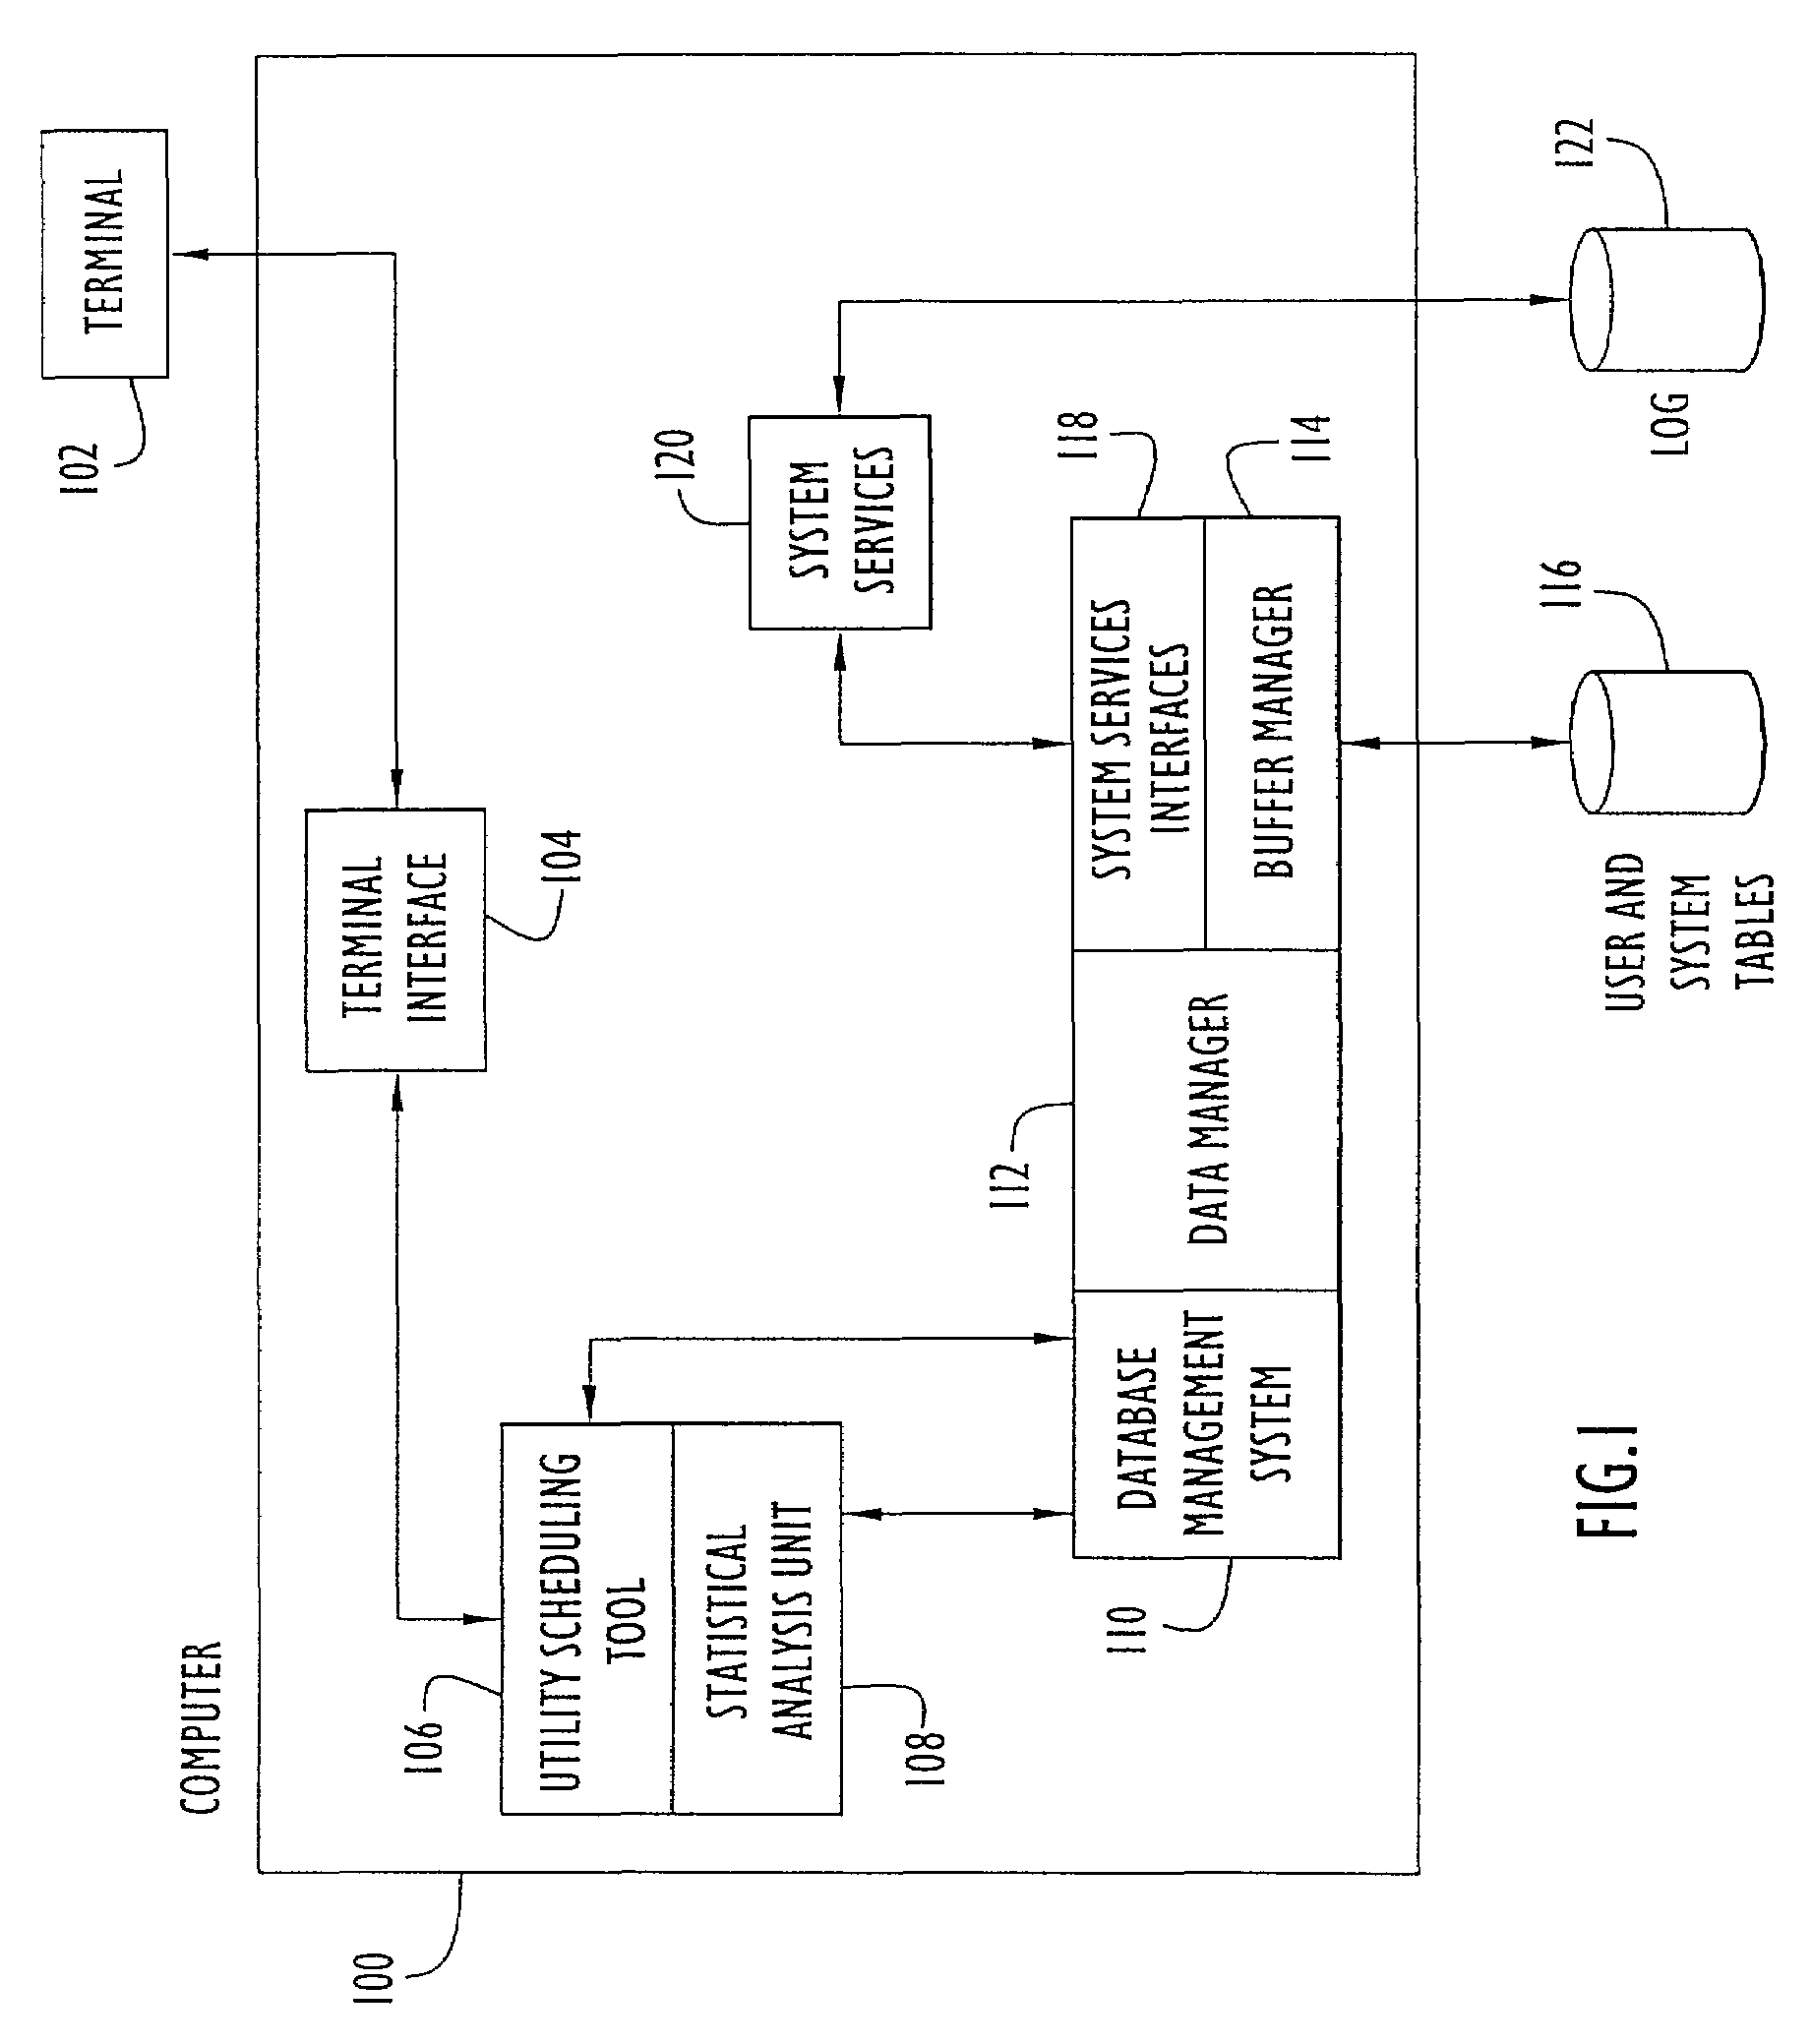 System and method for predicting execution time of a database utility command